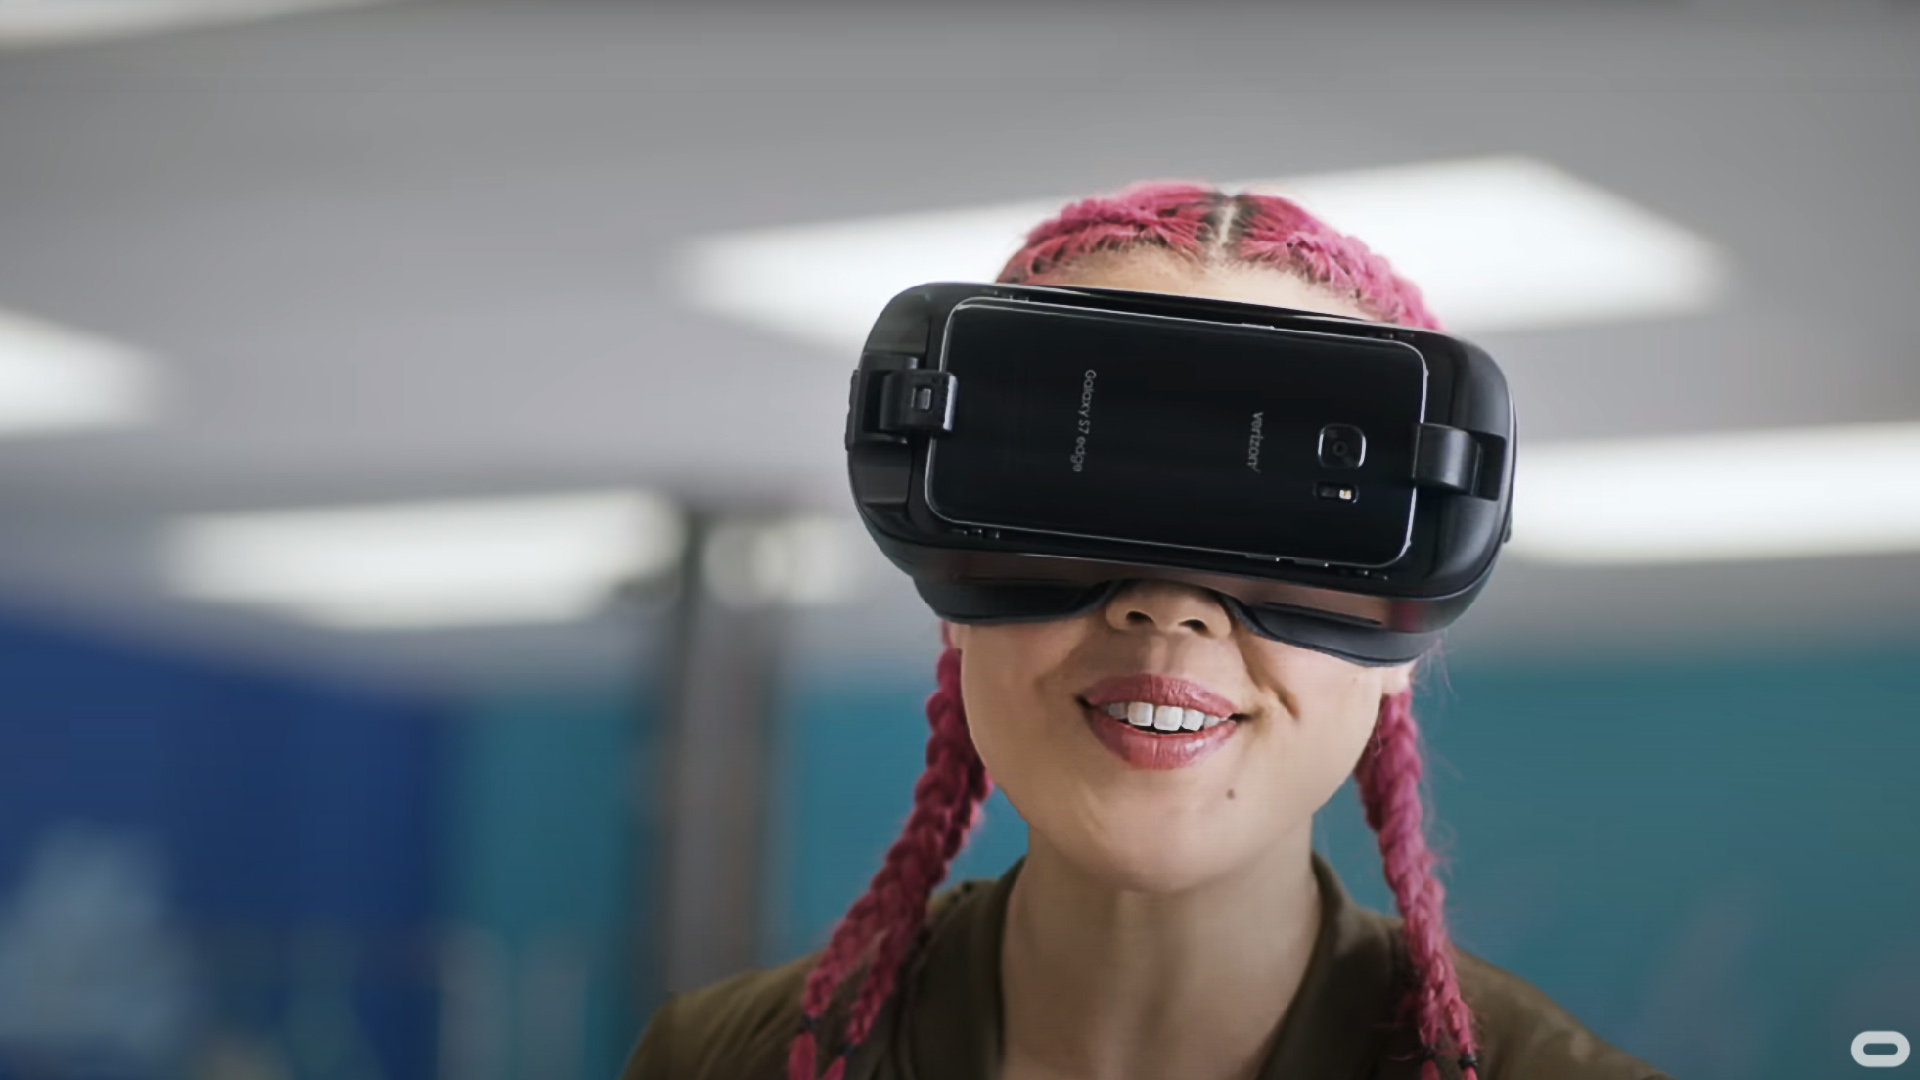 Galaxy S10 will drop Gear VR support once Android 12 lands in December -  SamMobile